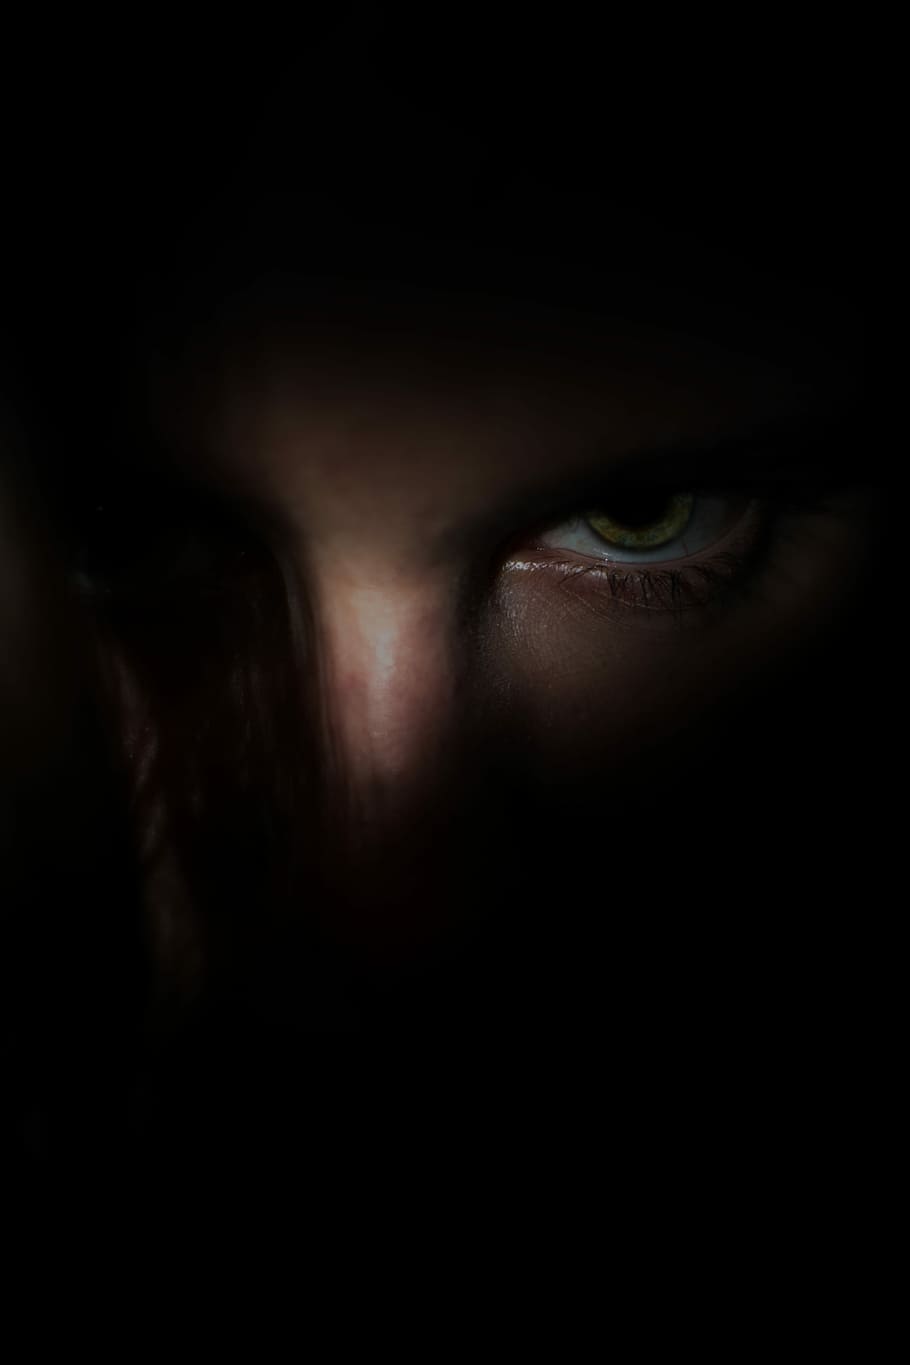 person face, untitled, eye, shadow, dark, mad, scary, angry, night, HD wallpaper